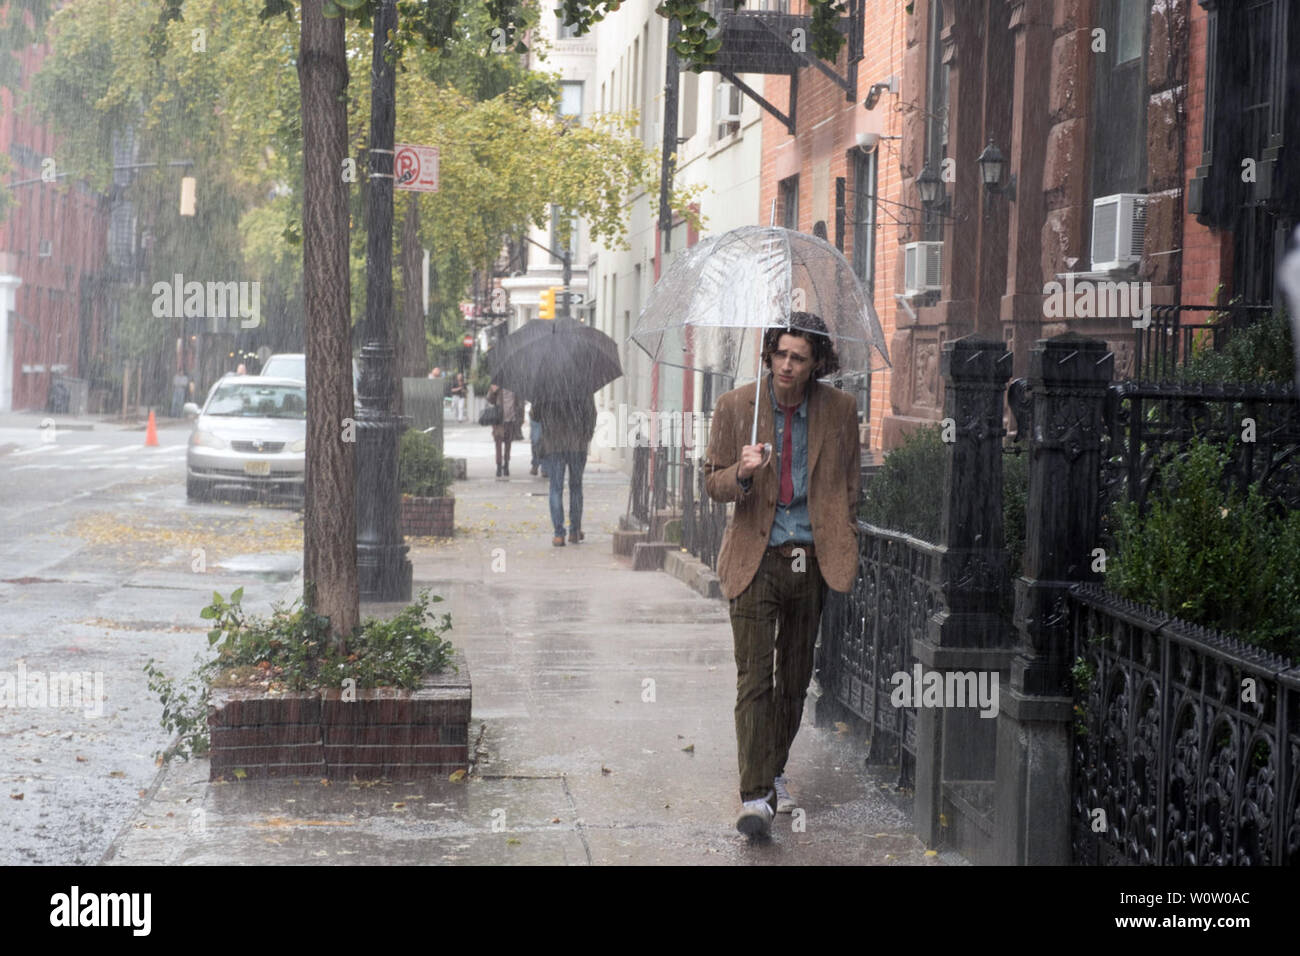 A Rainy Day in New York - Official Trailer - Woody Allen Movie